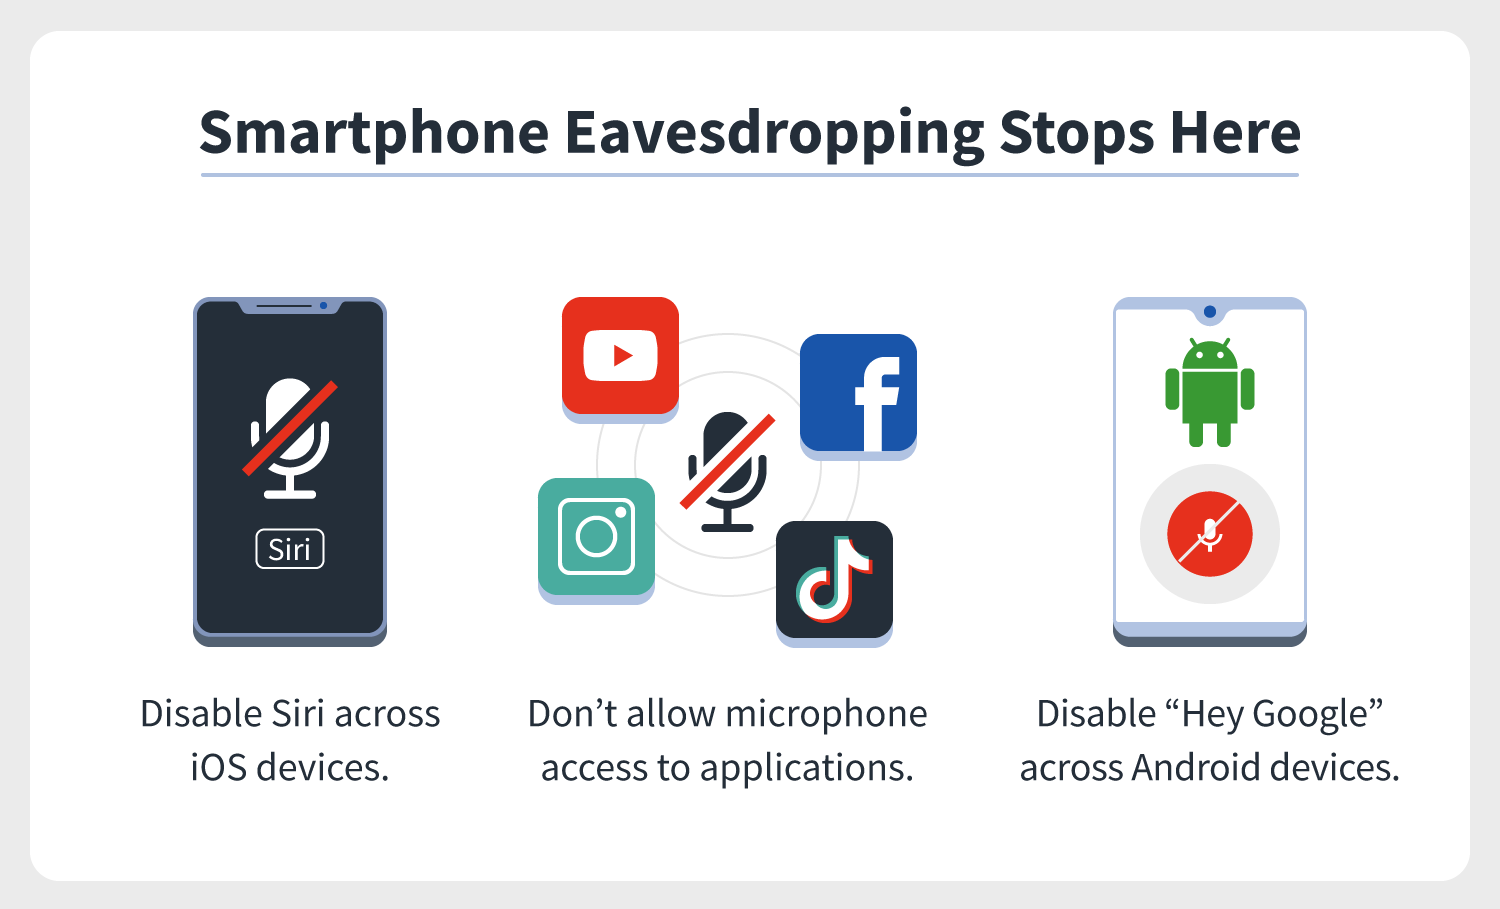 three illustrations indicate how to stop phones from listening to us, including by disabling Siri and “Hey Google,” as well as not allowing microphone access to apps